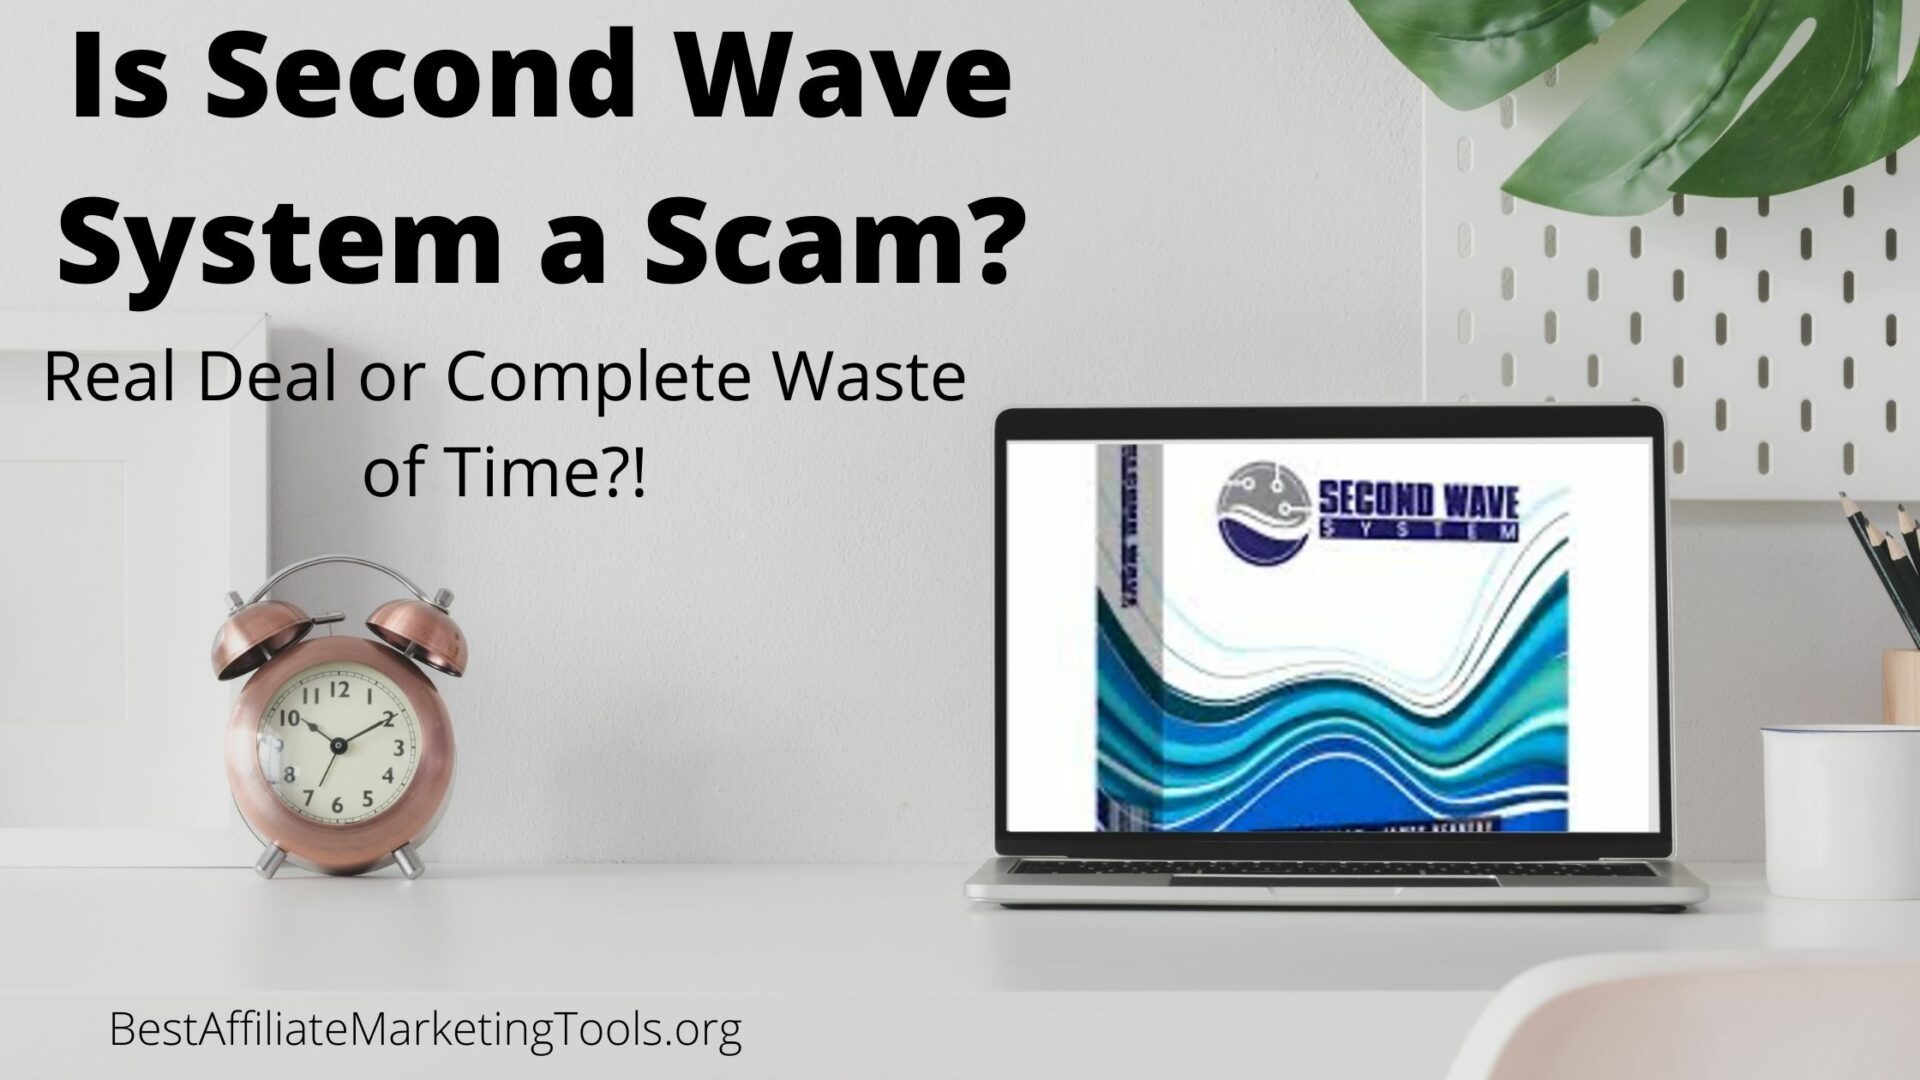 Is Second Wave System a Scam